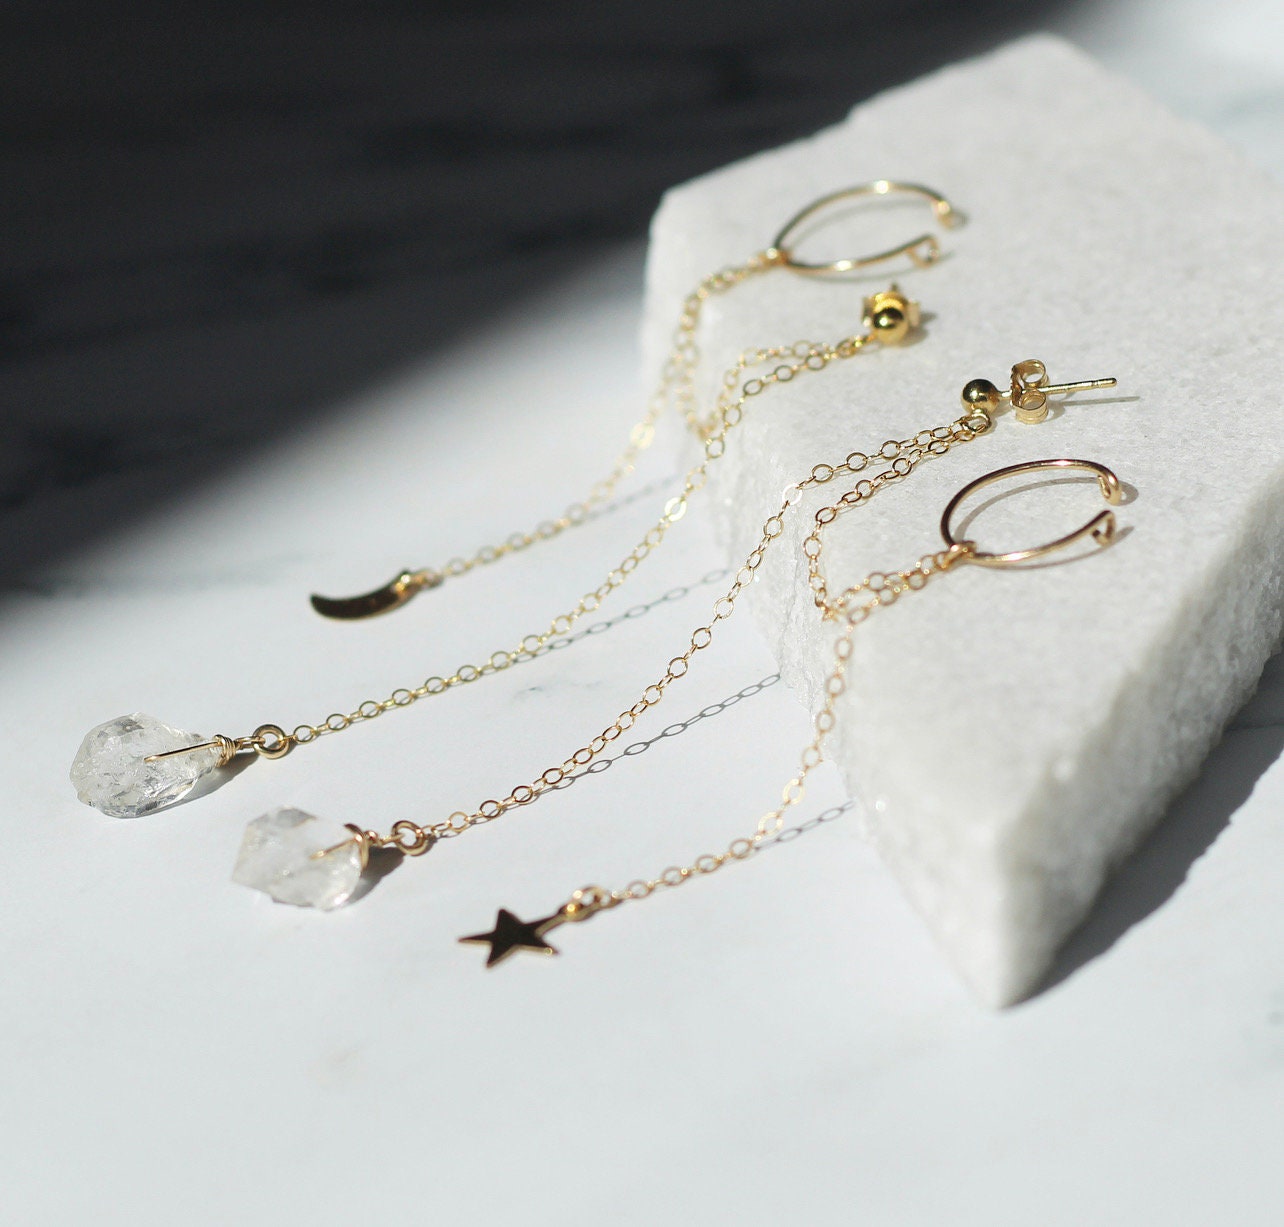 Hanging Chain Post Earrings with Bead Accents in 14k Yellow and White Gold  - The Lustro Hut